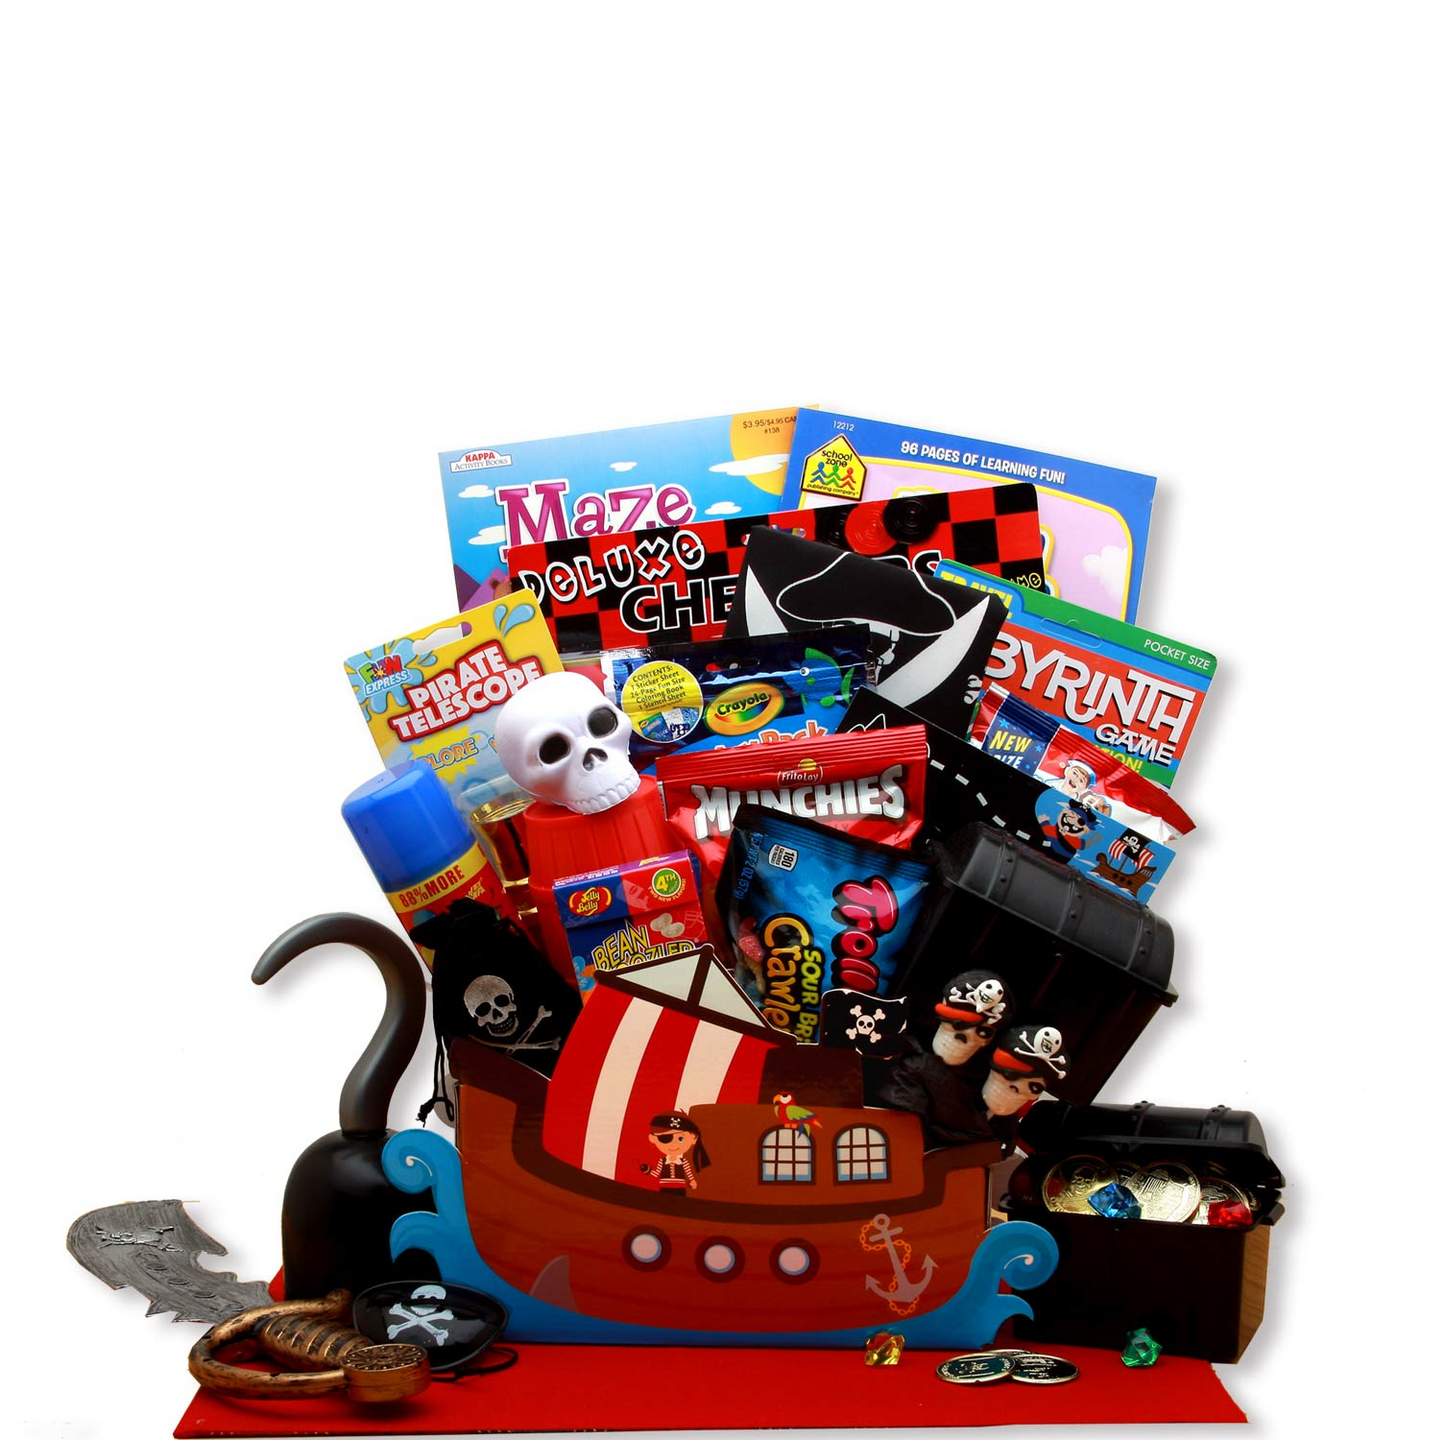 A Pirate's Life Gift Box for Kids - Complete Pirate Themed Gift Basket